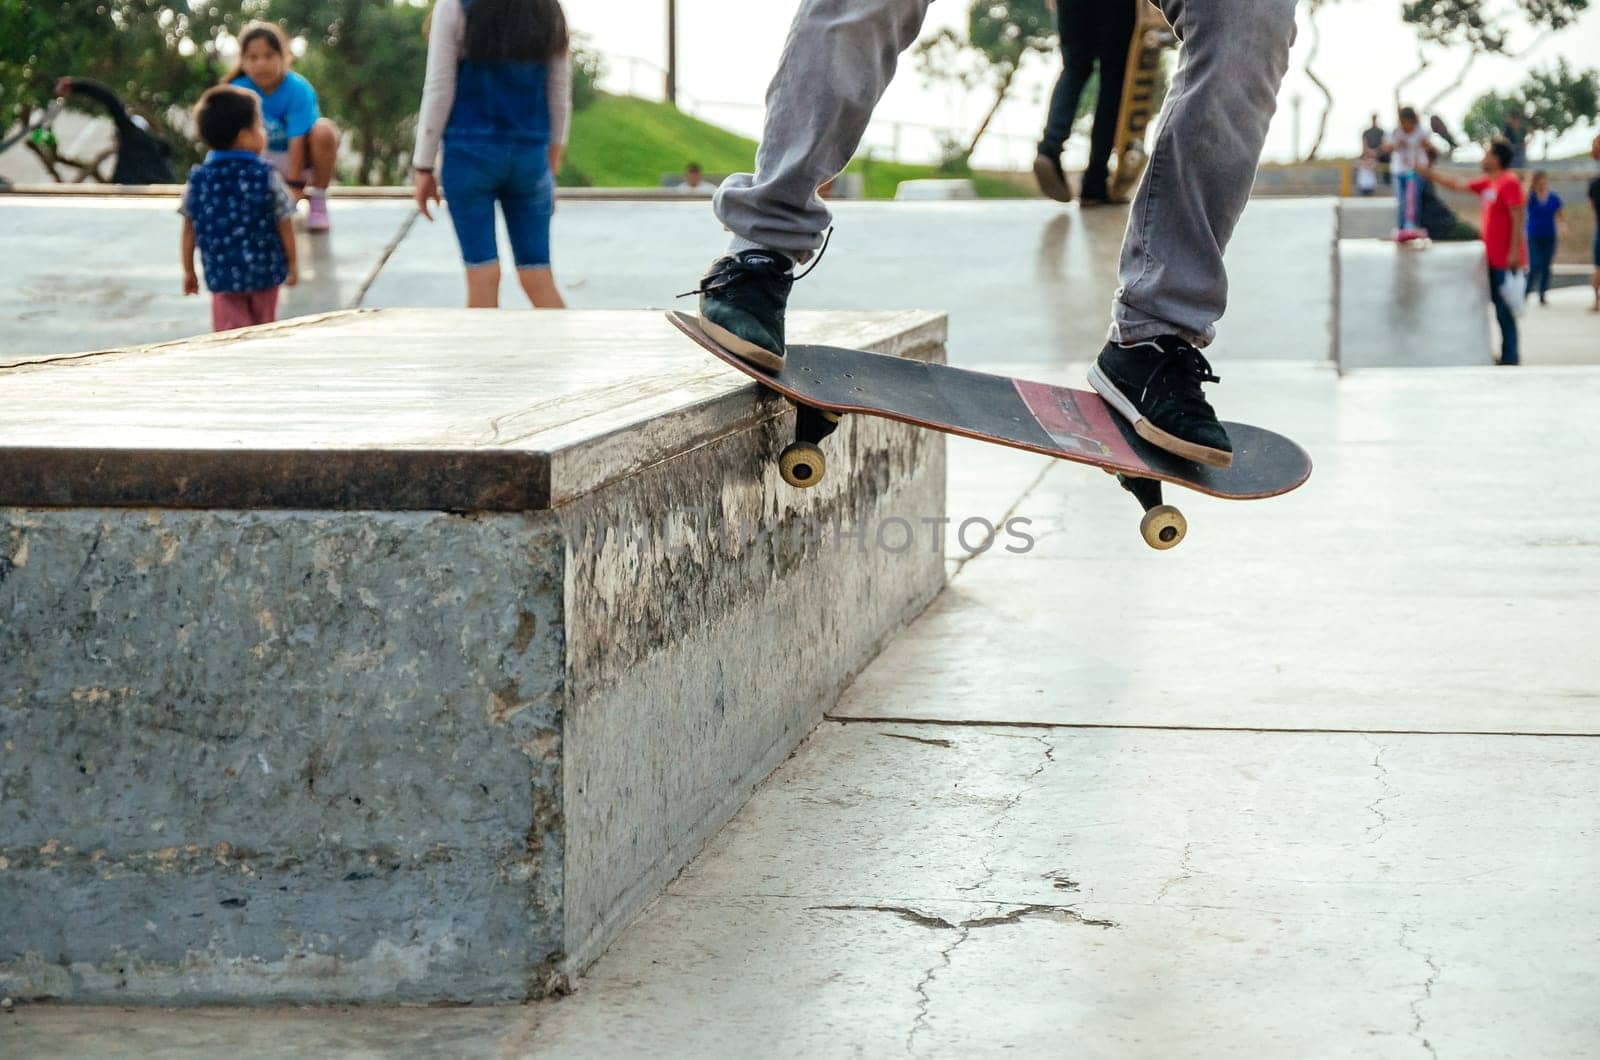 Skateboarder is doing a crooked grind trick on a bench in skatepark. by Peruphotoart